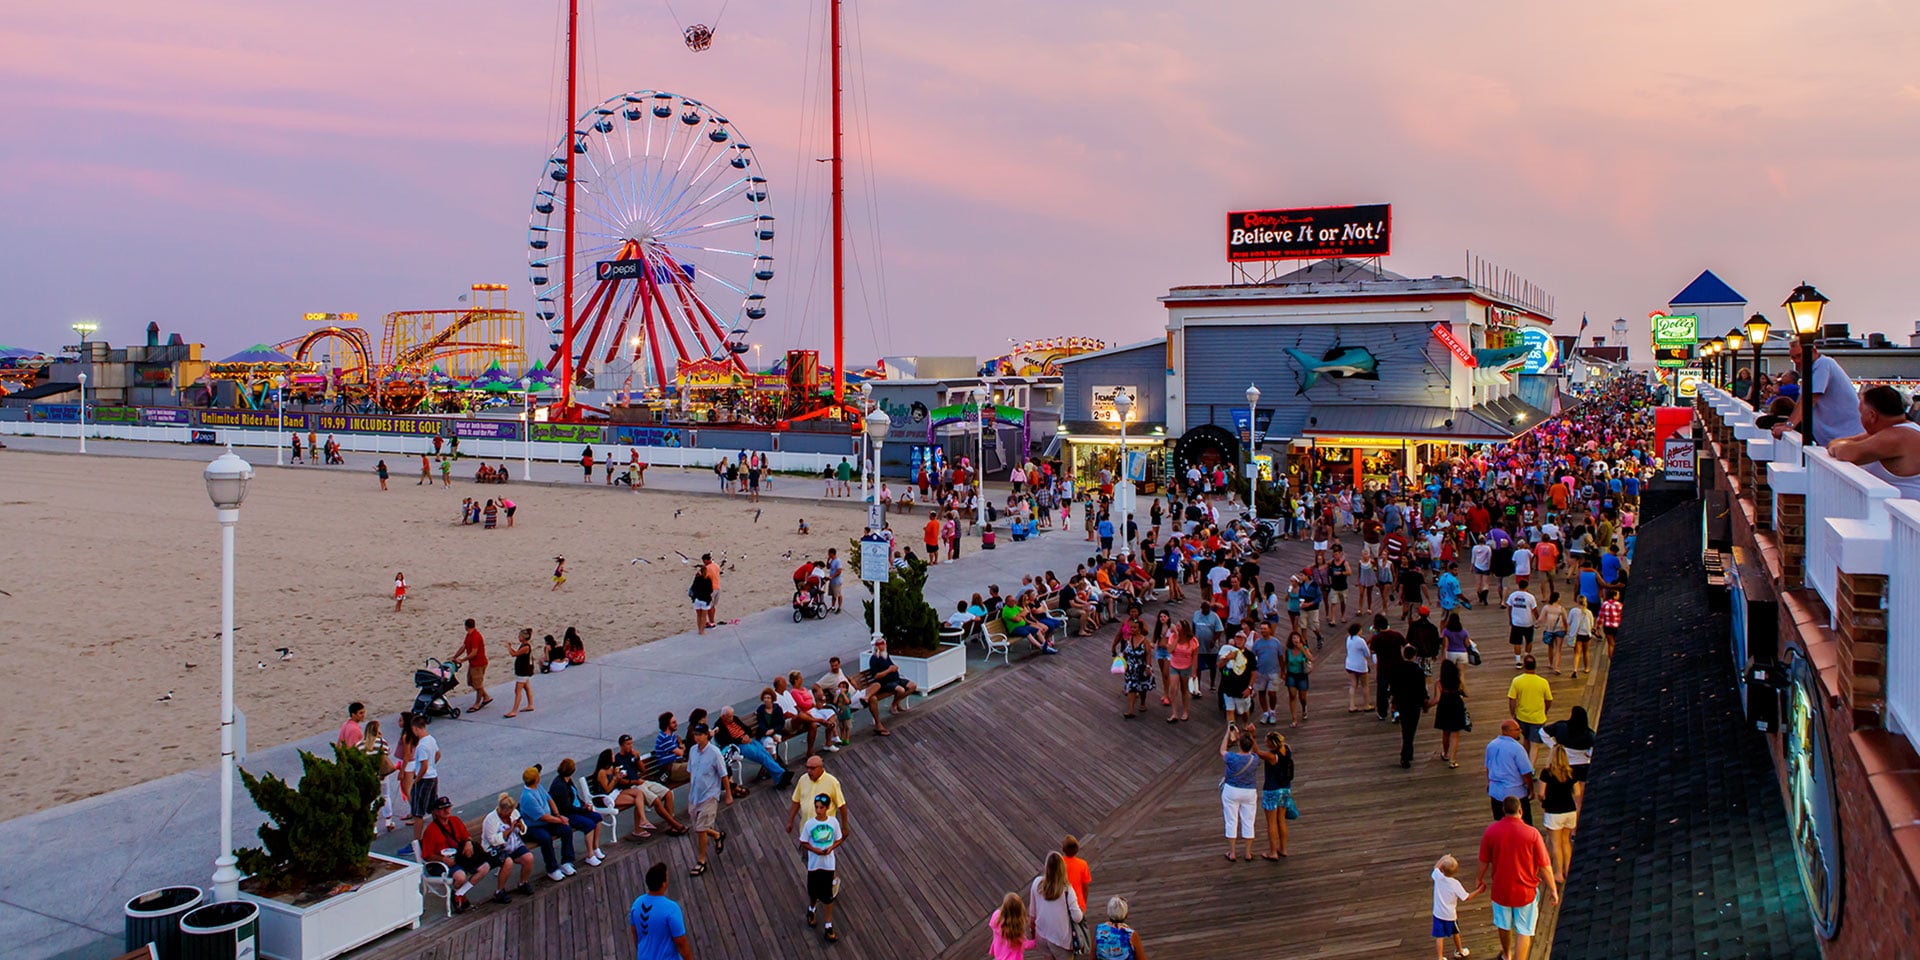 Boardwalk Bites and More: How to See Ocean City, MD Like a Local